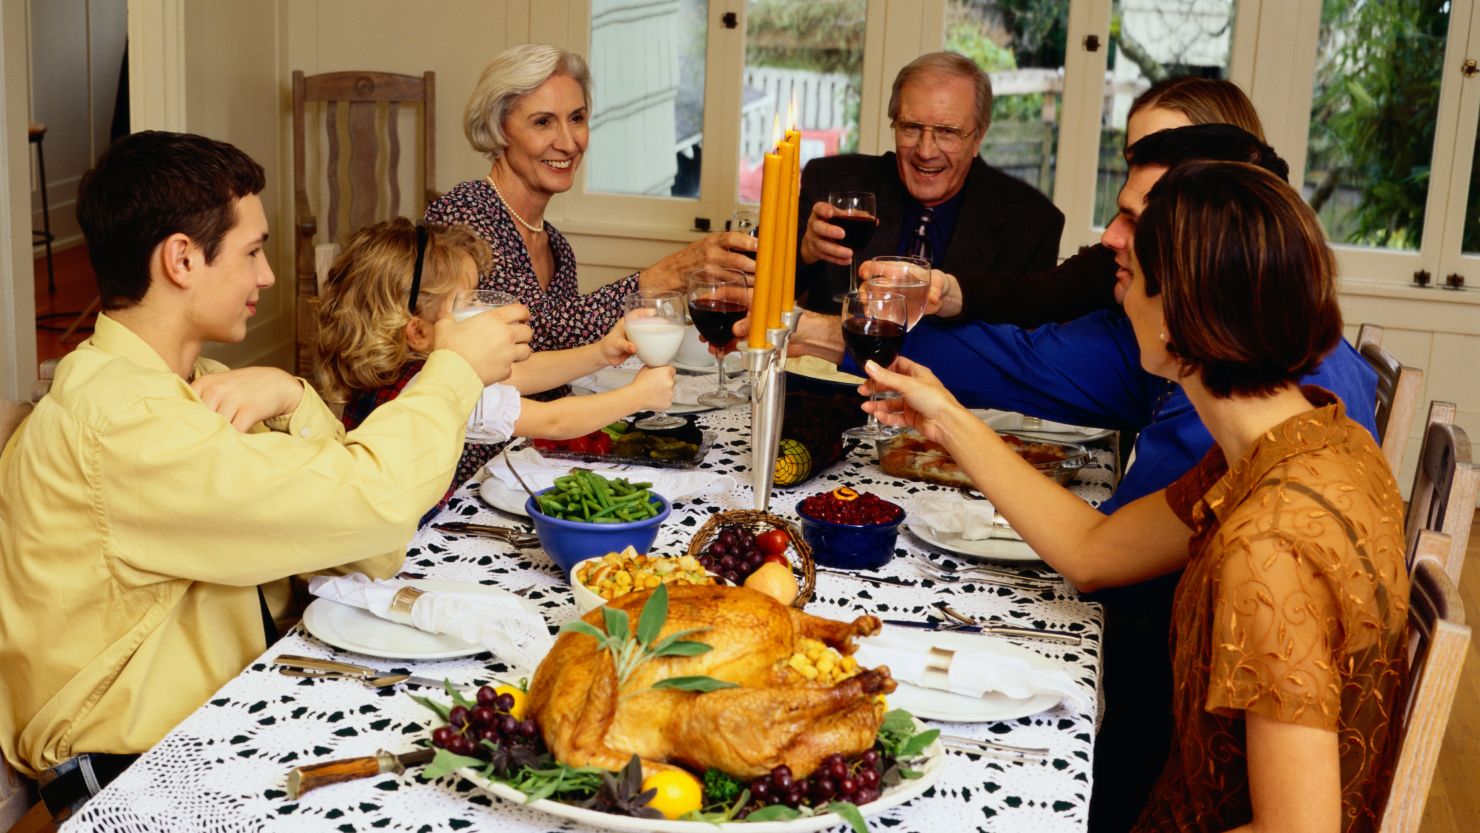 You can talk politics at the Thanksgiving dinner table, just be respectful of others.